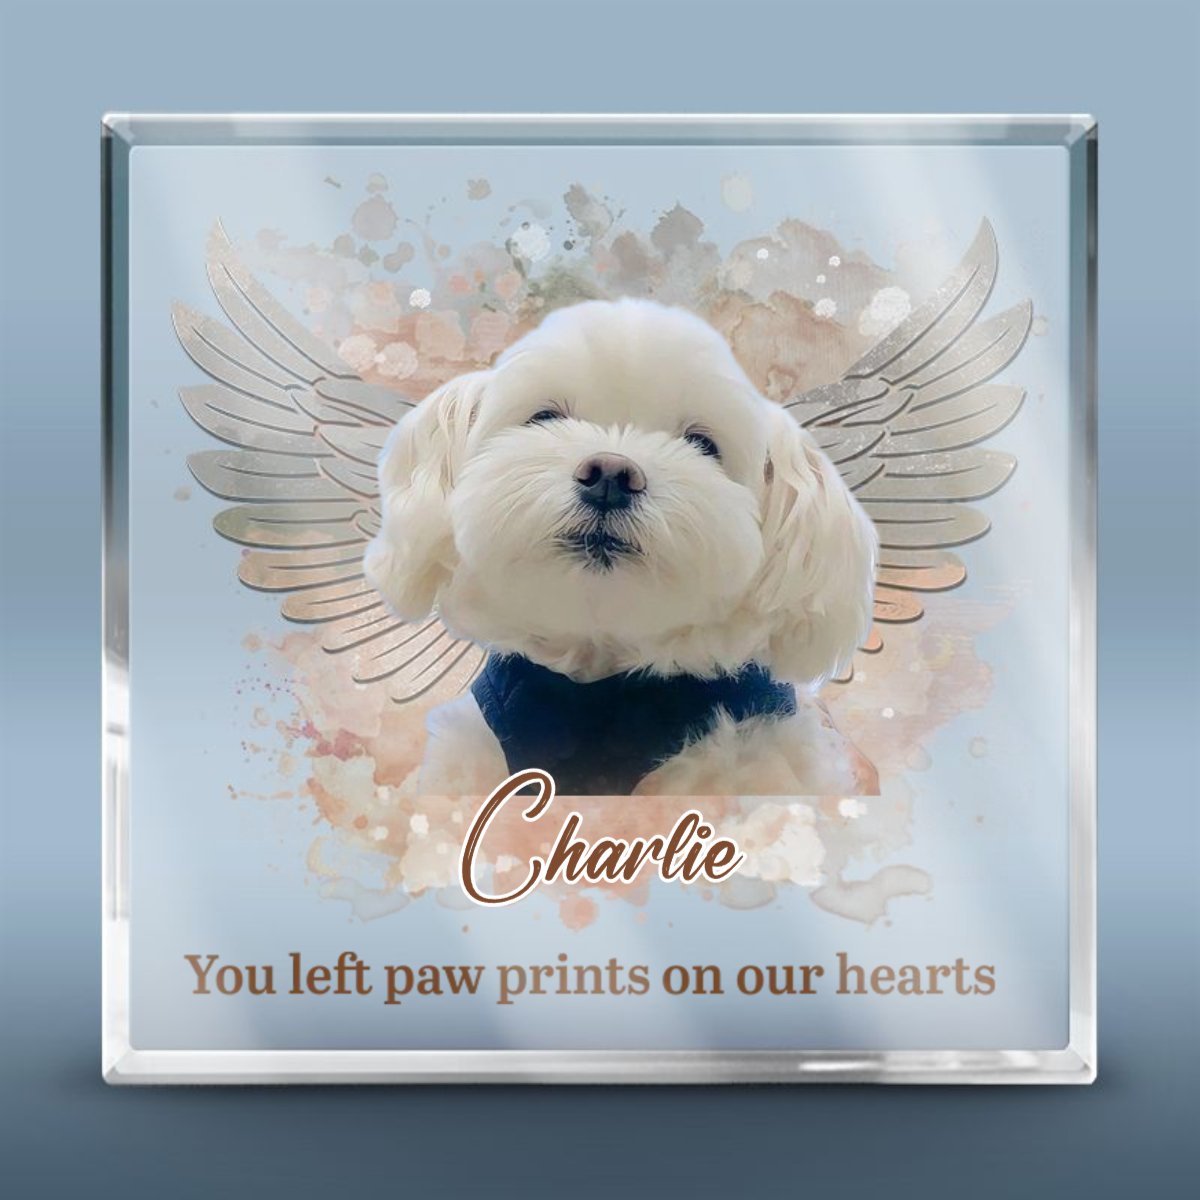 Pet Lovers - Pets Teach Us The Purest Kind Of Love - Memorial Personalized Custom Square Shaped Acrylic Plaque - The Next Custom Gift